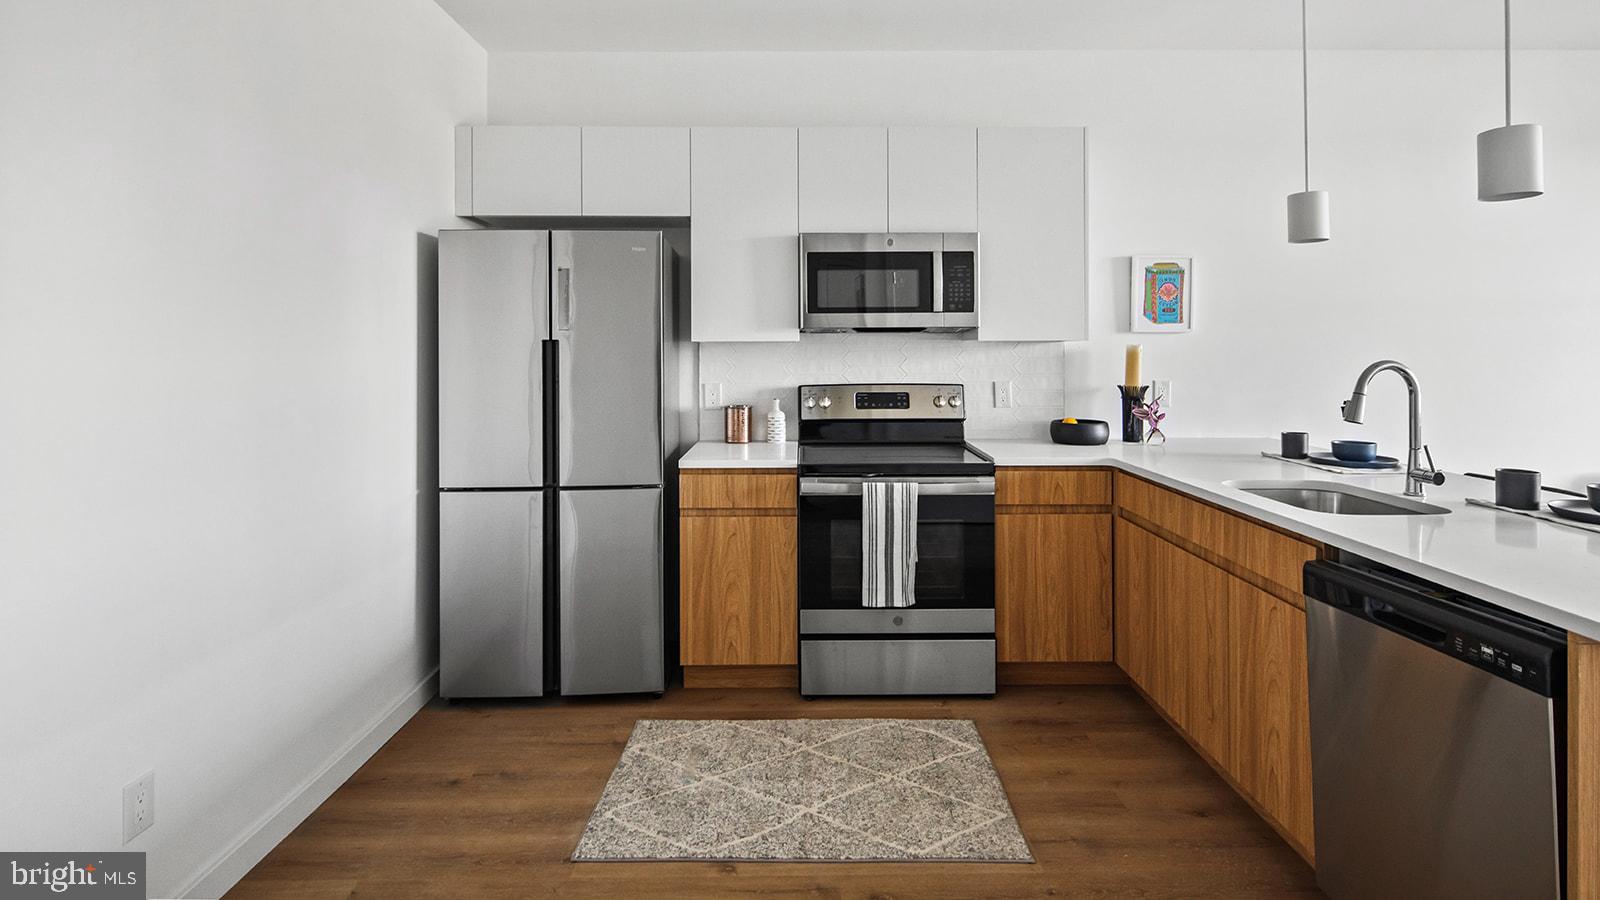 a kitchen with stainless steel appliances granite countertop a refrigerator a stove a sink and a microwave